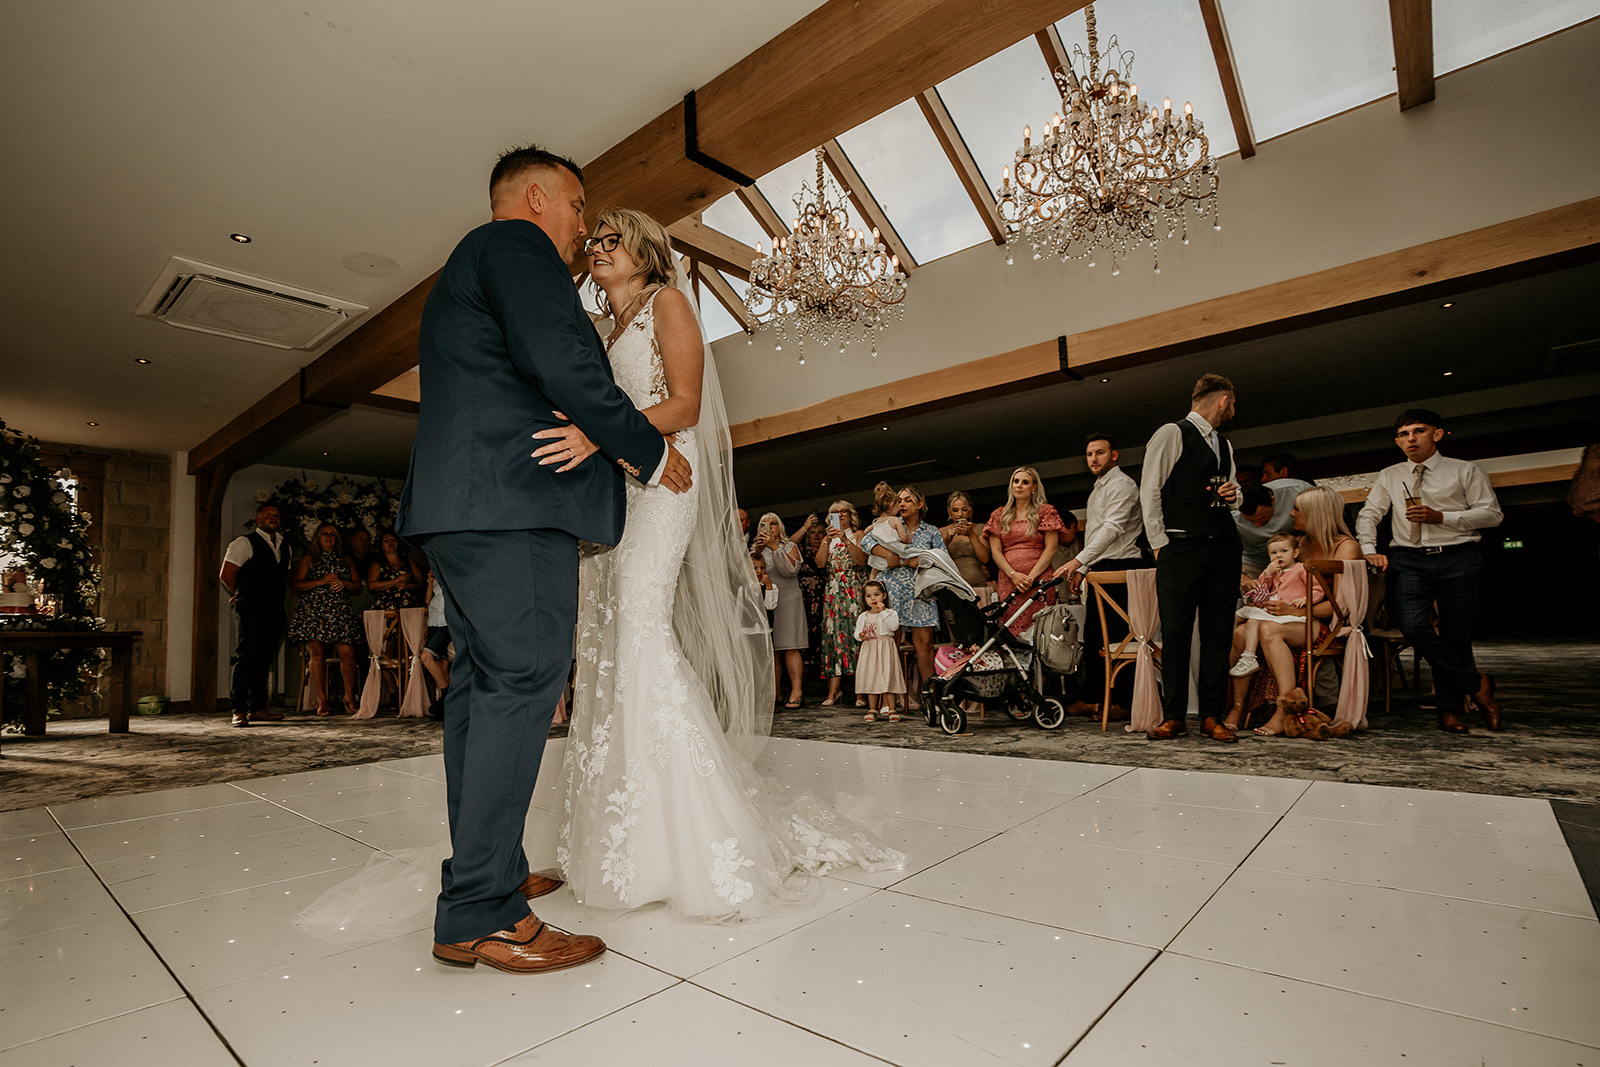 Ceremony room and first dance at wedding at peak edge hotel in chesterfield